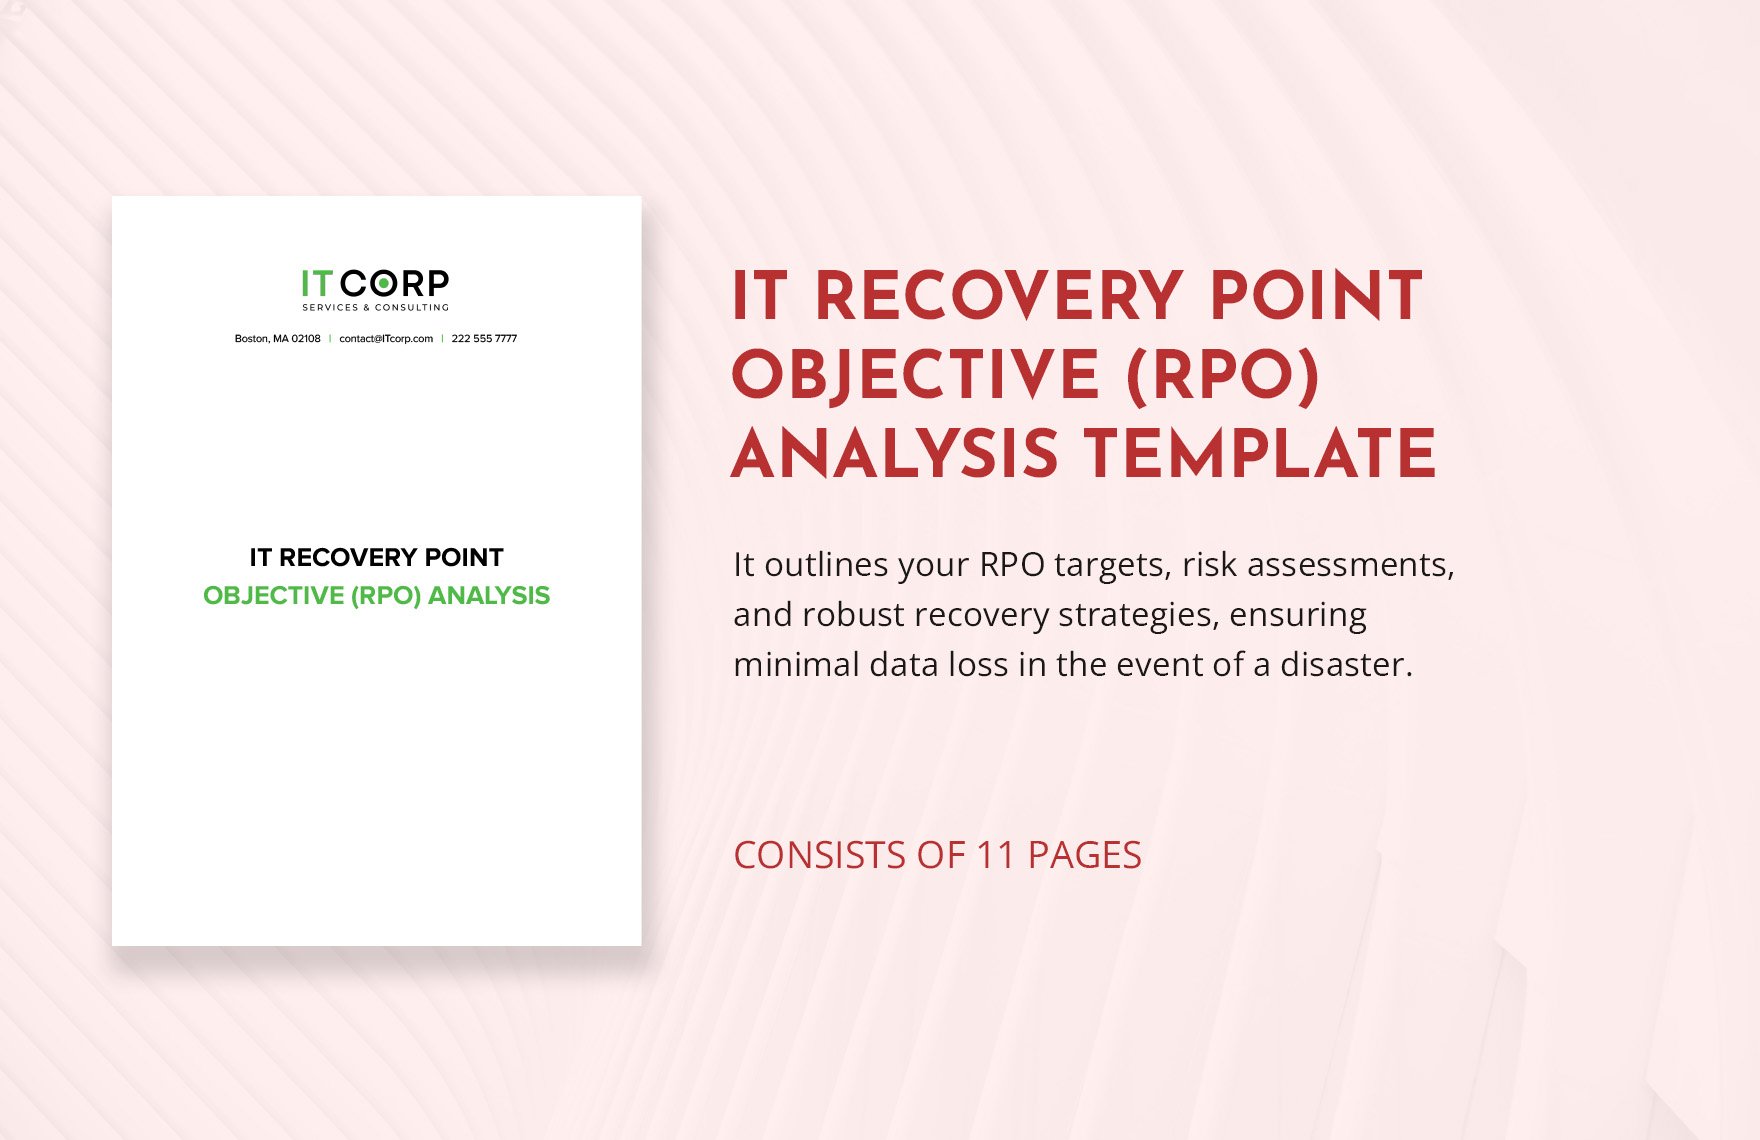 IT Recovery Point Objective (RPO) Analysis Template